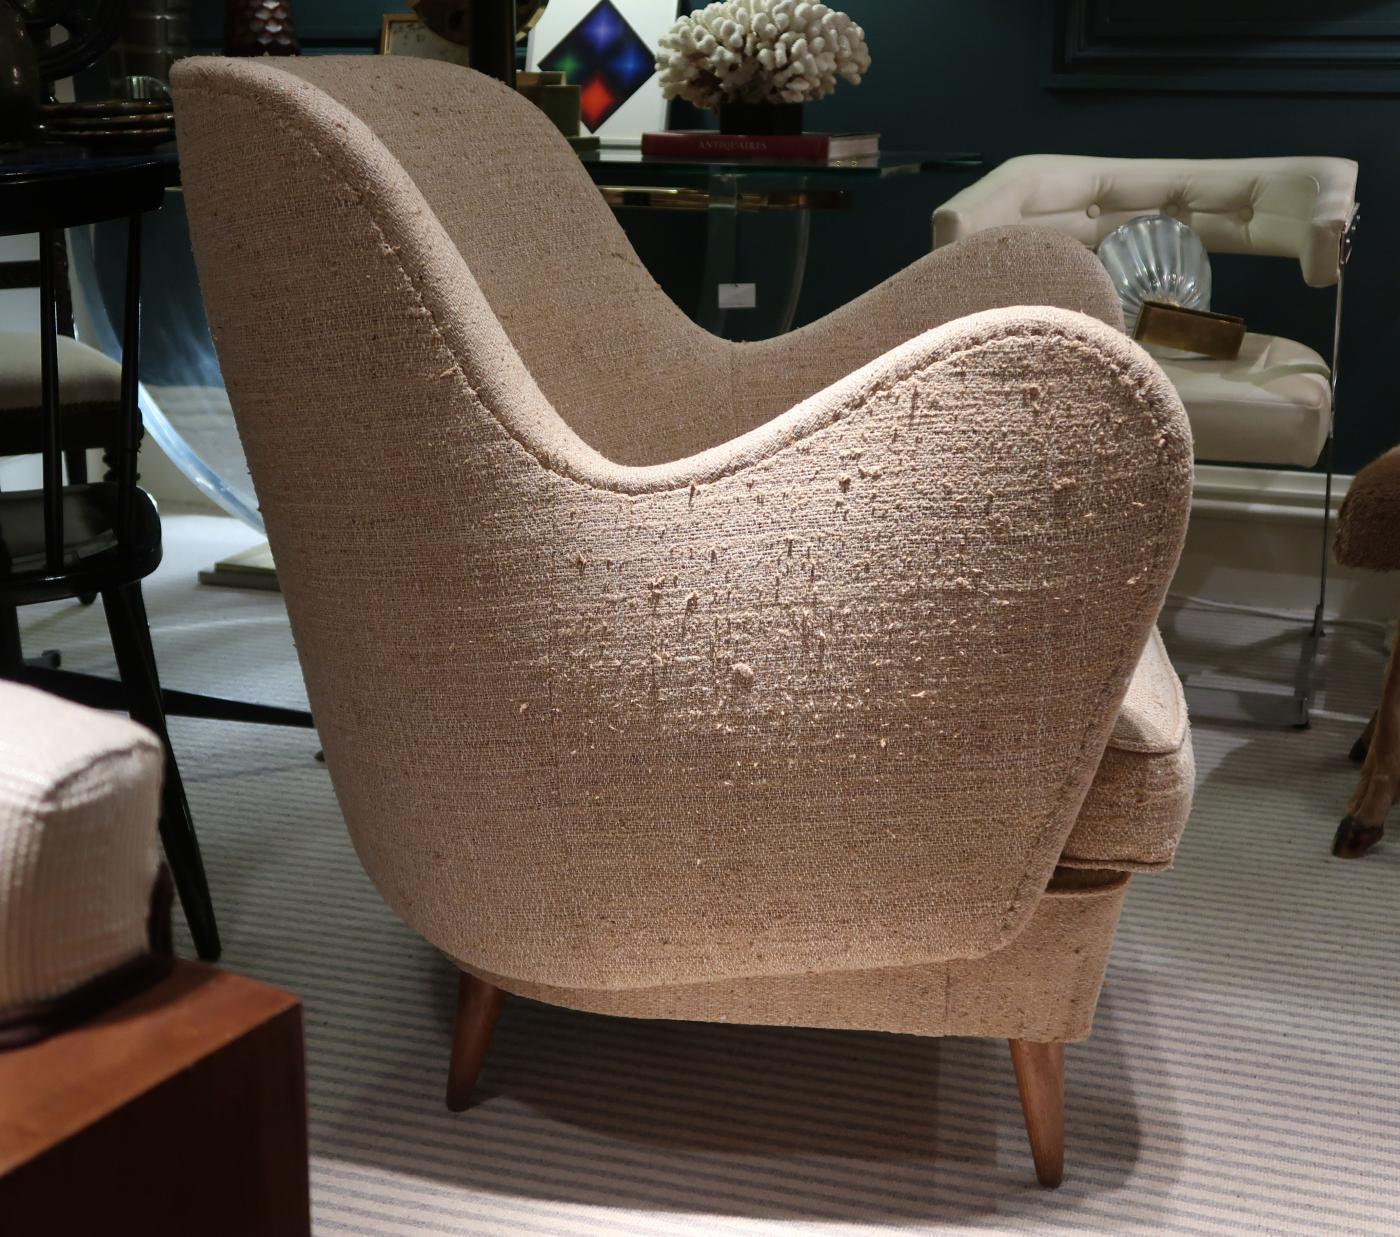 ISA, Pair of Beige Indian Silk and Wood Legs Midcentury Italian Armchairs, 1950 For Sale 2